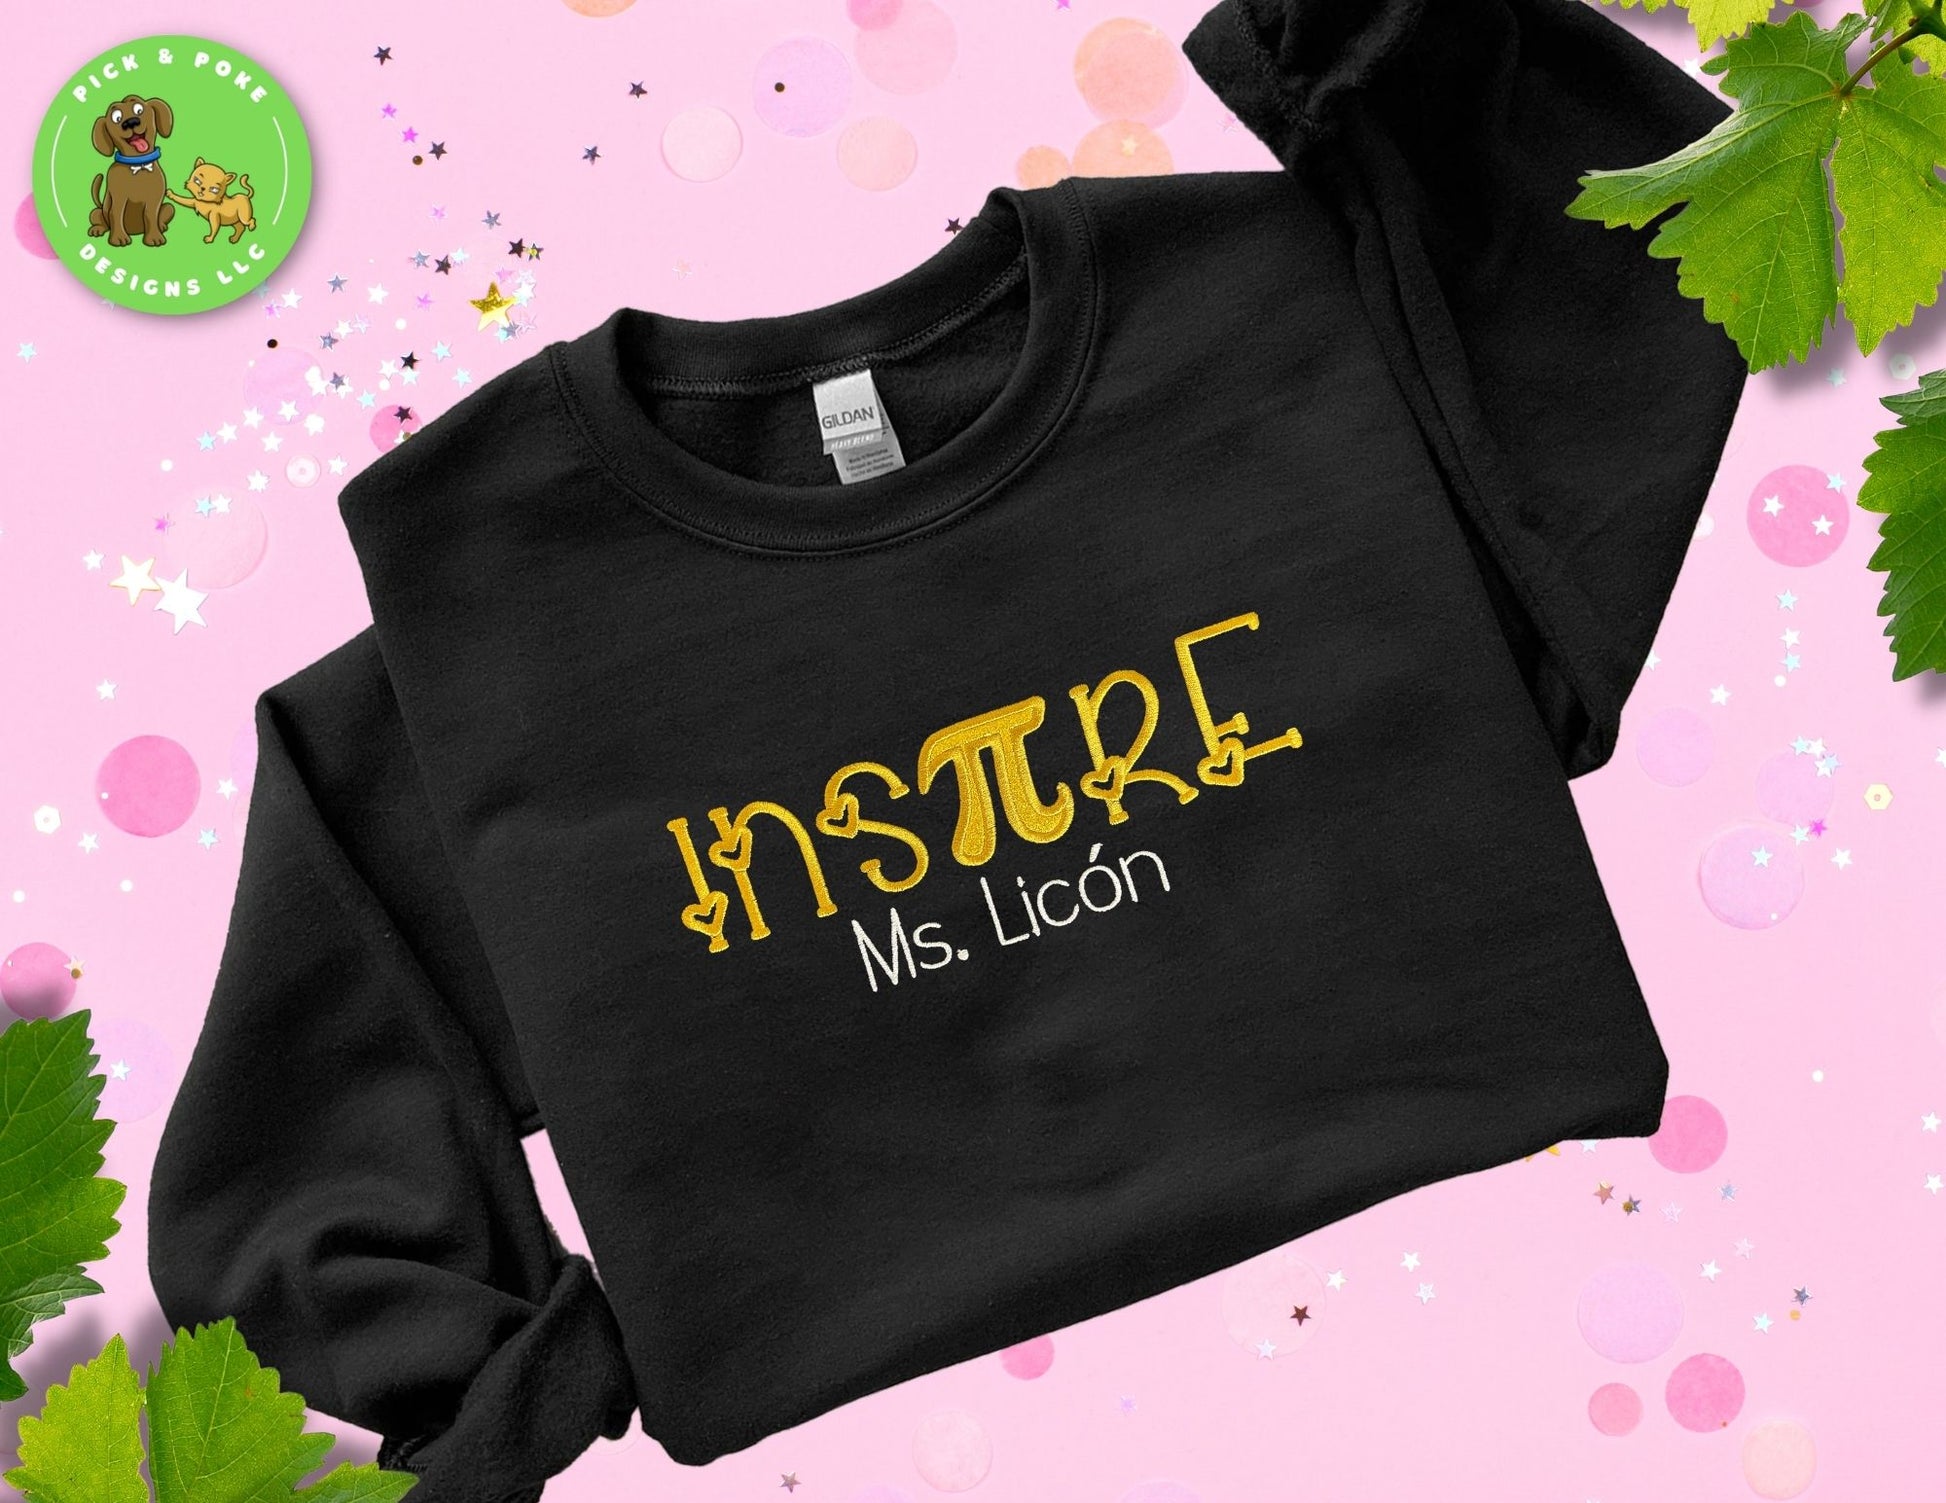 Black crewneck sweatshirt embroidered with the phrase “inspire” stylized with a PI mathematics sign and teacher name